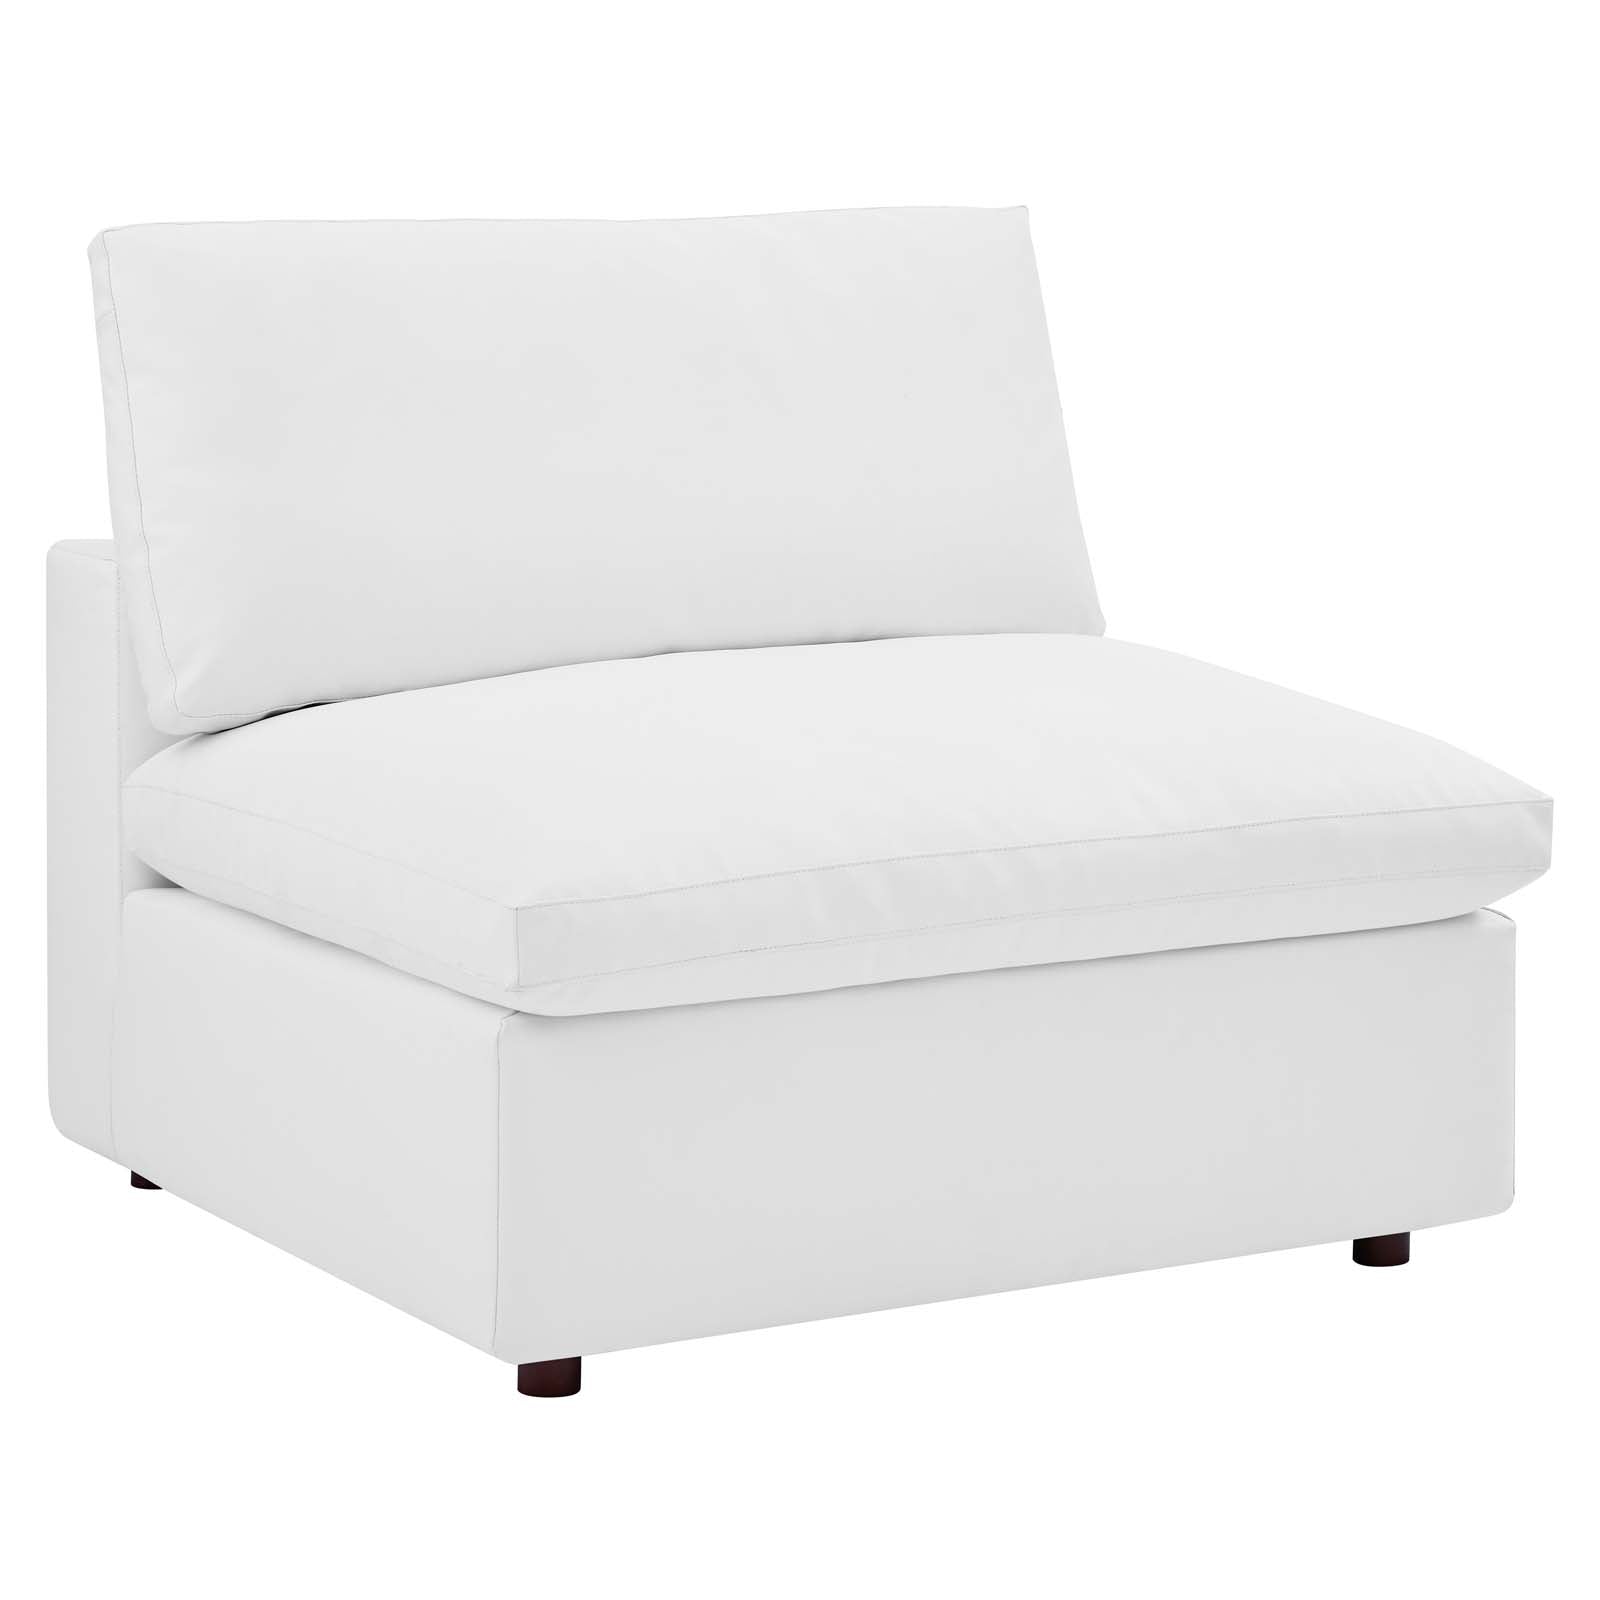 Modway Sofas & Couches - Commix Down Filled Overstuffed Vegan Leather 4 Seater Sofa White